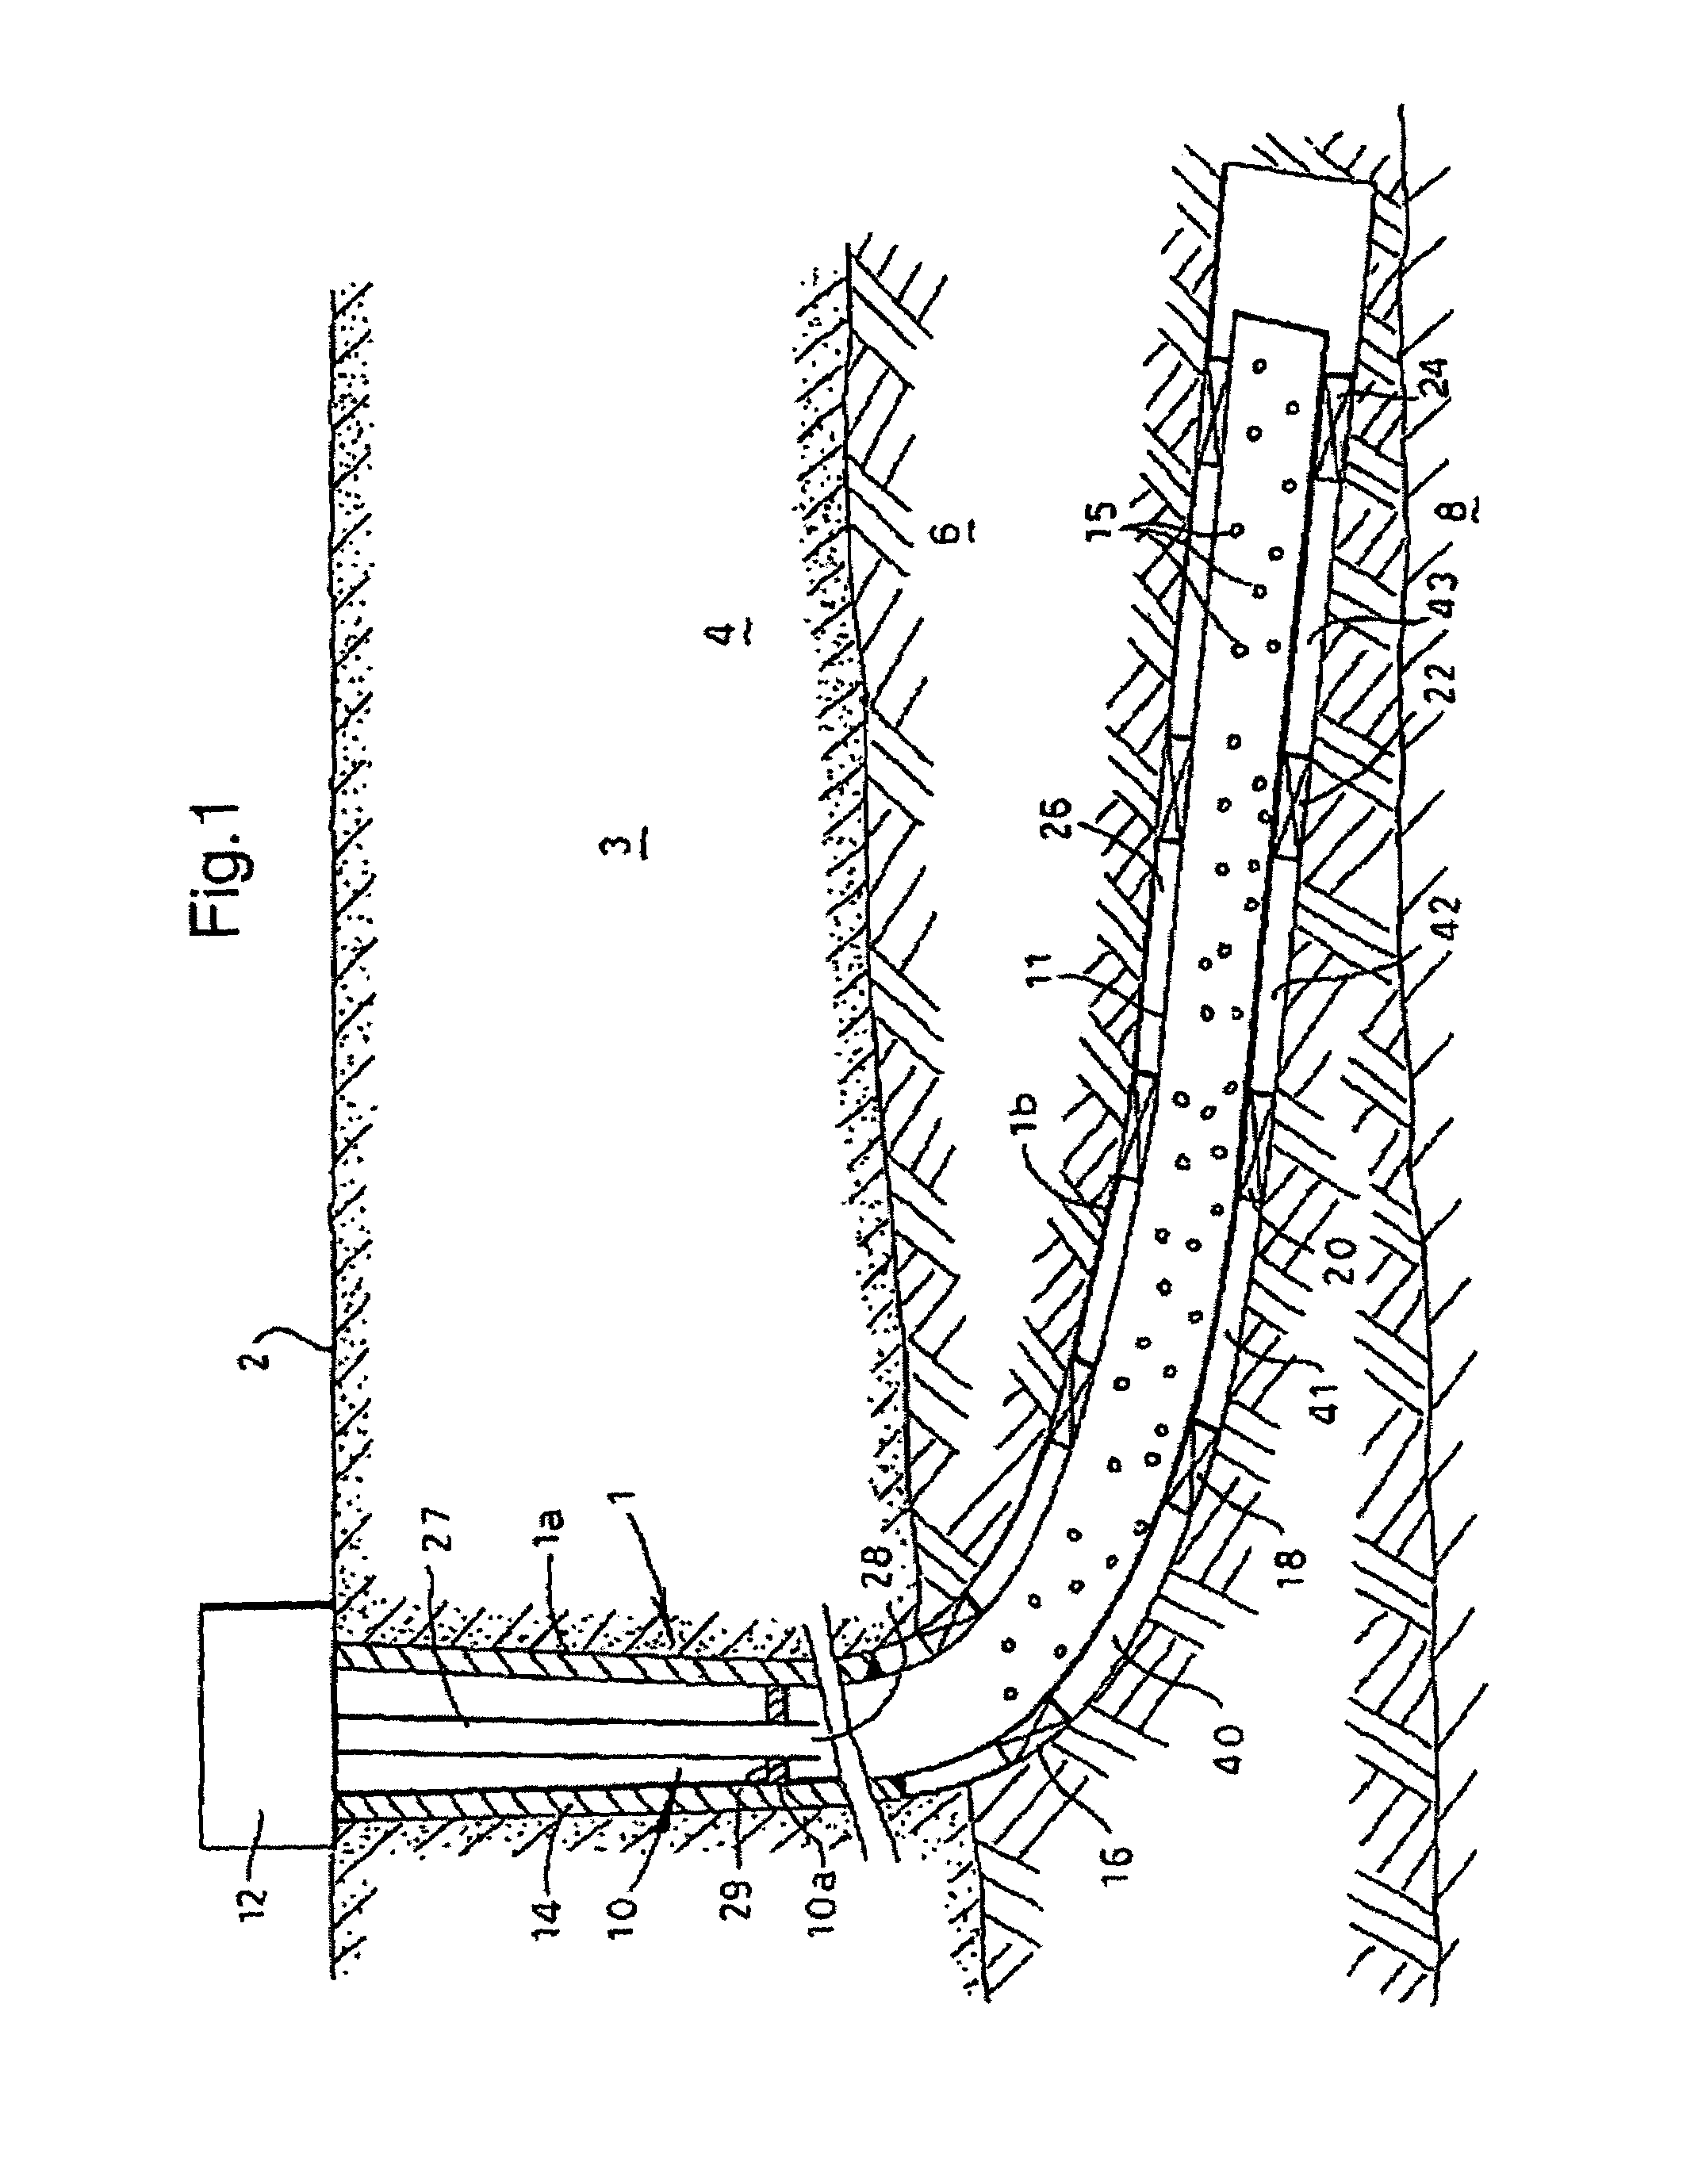 Wellbore system with annular seal member